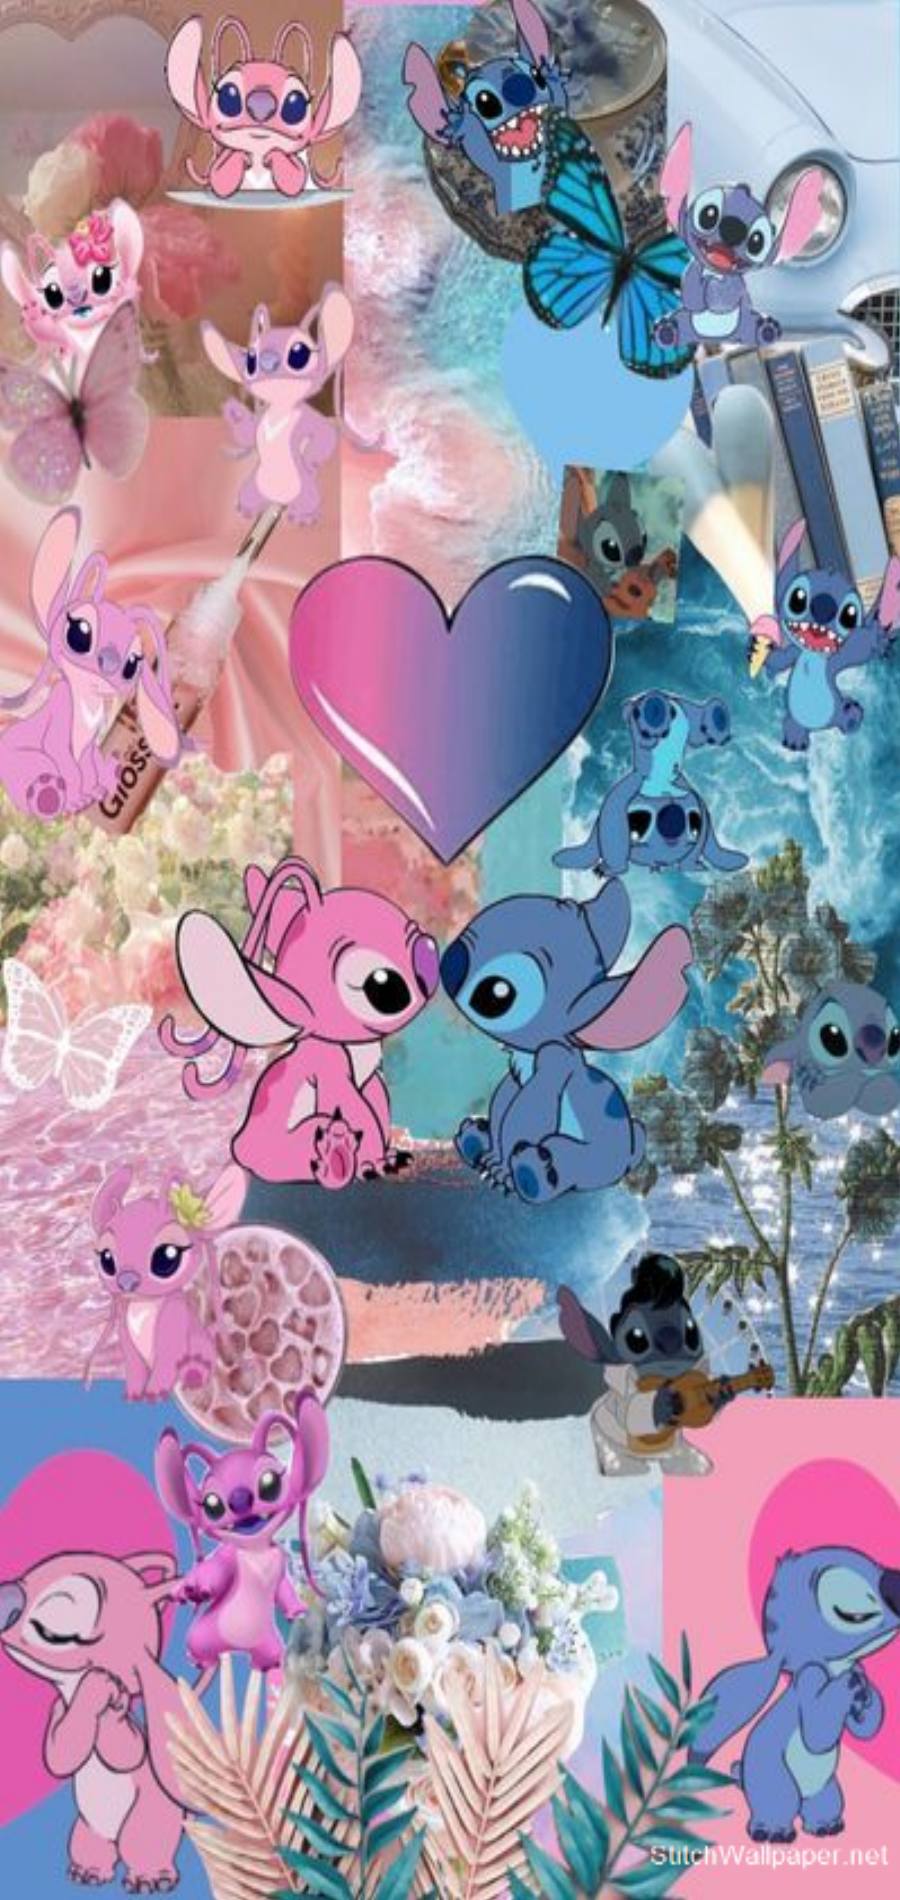 stitch pictures wallpaper